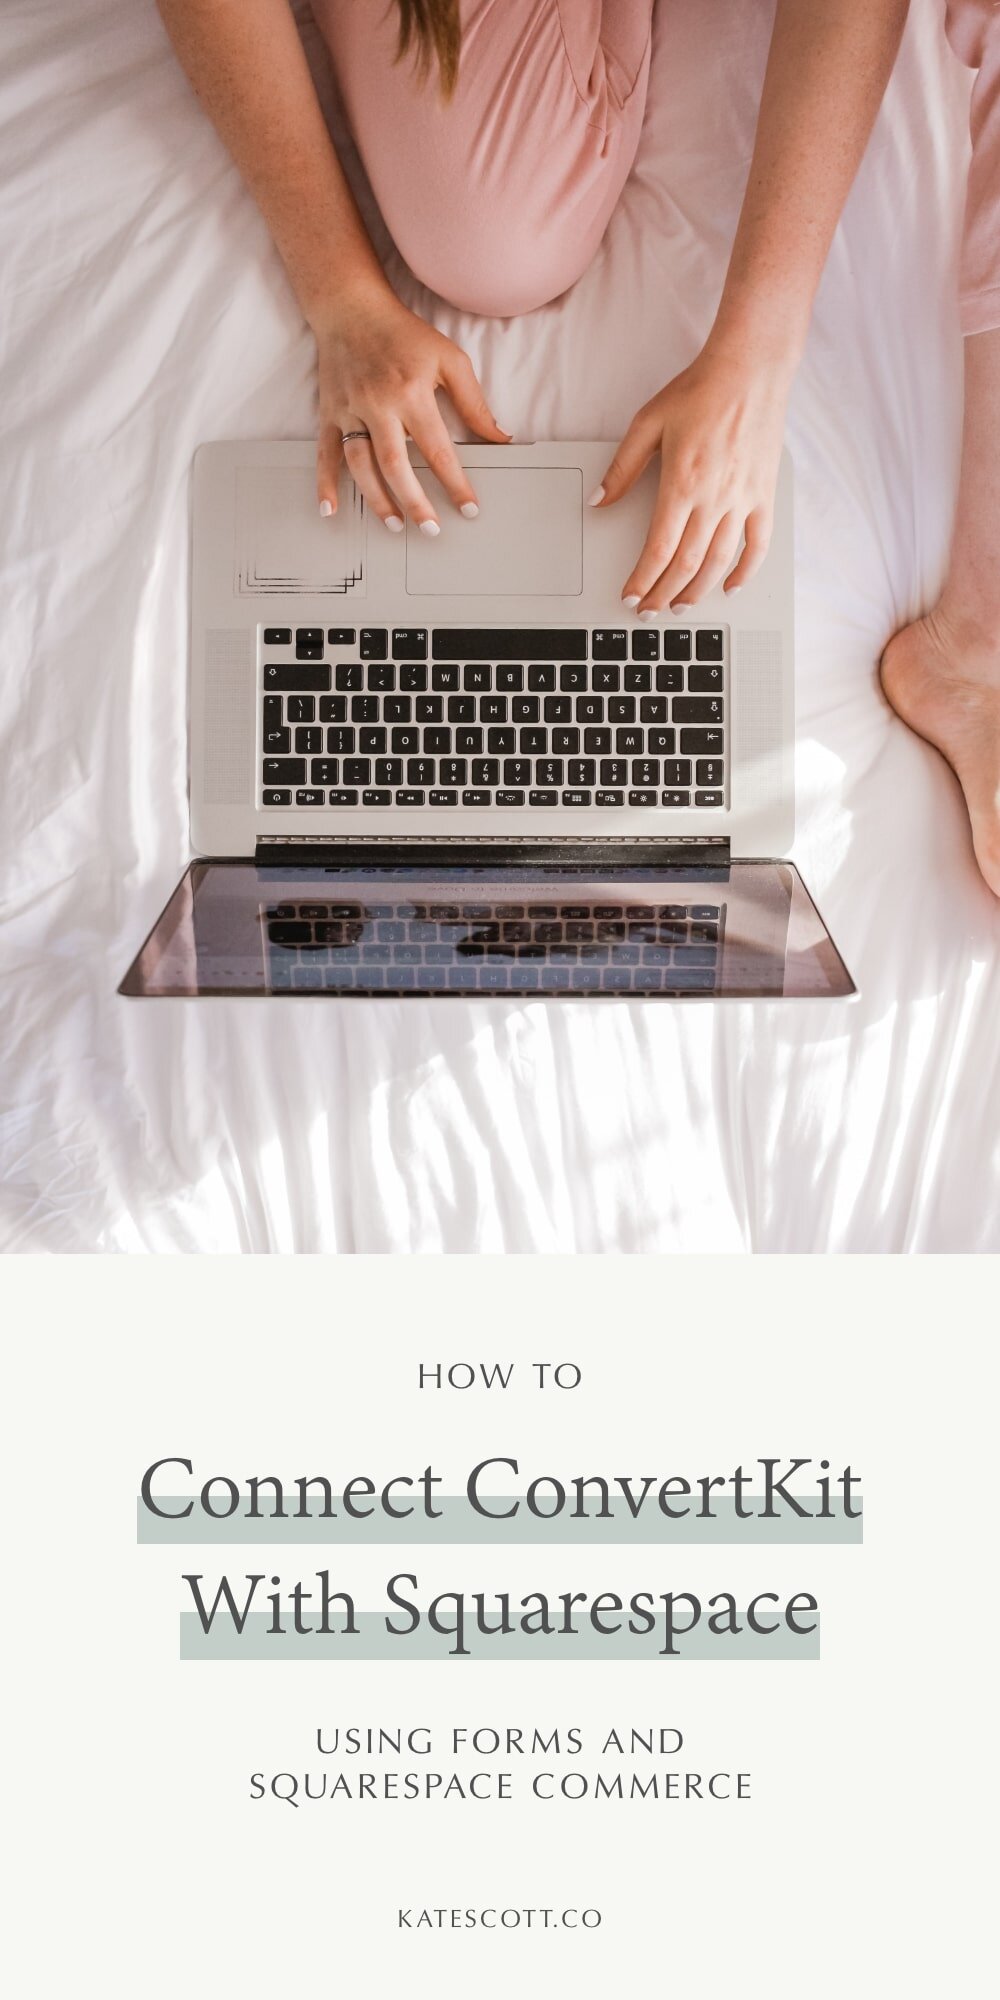 Want to know how to connect ConvertKit and Squarespace? Here are 3 video tutorials to help you out! | Squarespace Tutorial Videos | ConvertKit Tutorial | Squarespace Tips and Tricks | Squarespace Website Design | Email Marketing Tips | Email Marketi…